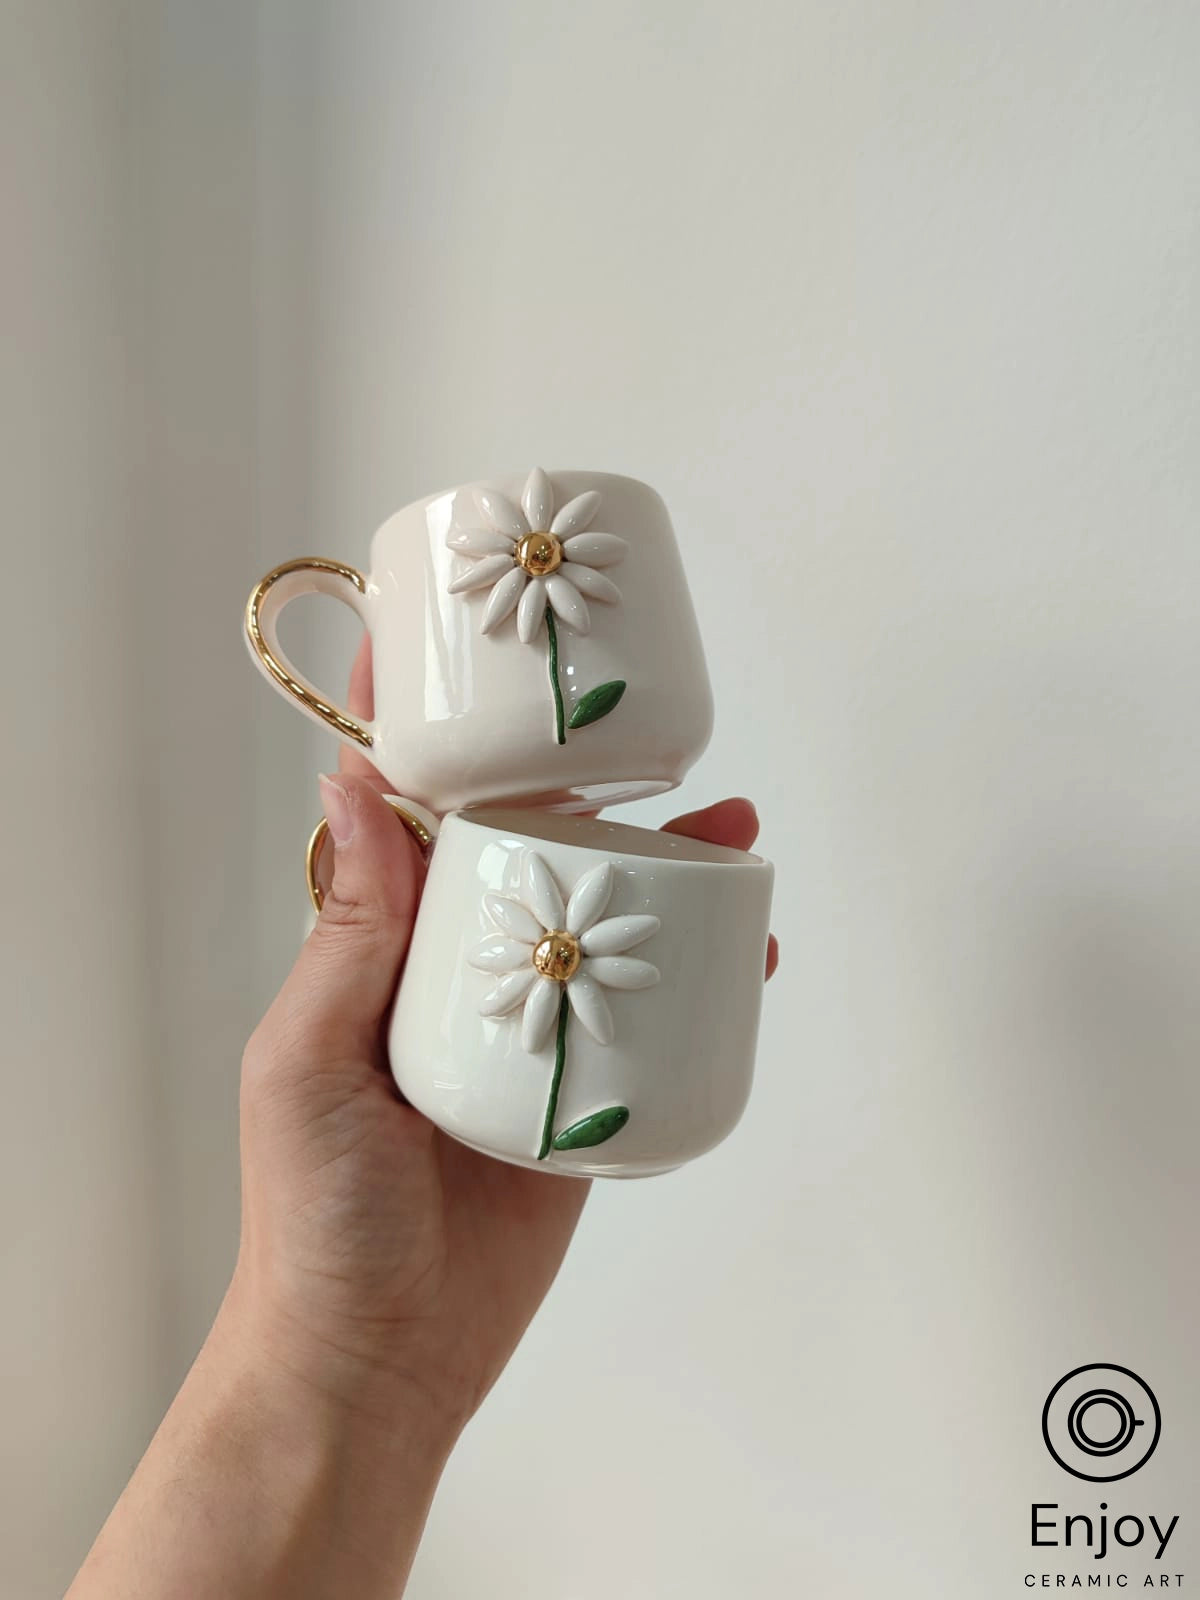 A hand holds two stackable white mugs with gold handles and 3D daisy designs, captured in soft light against a neutral background.